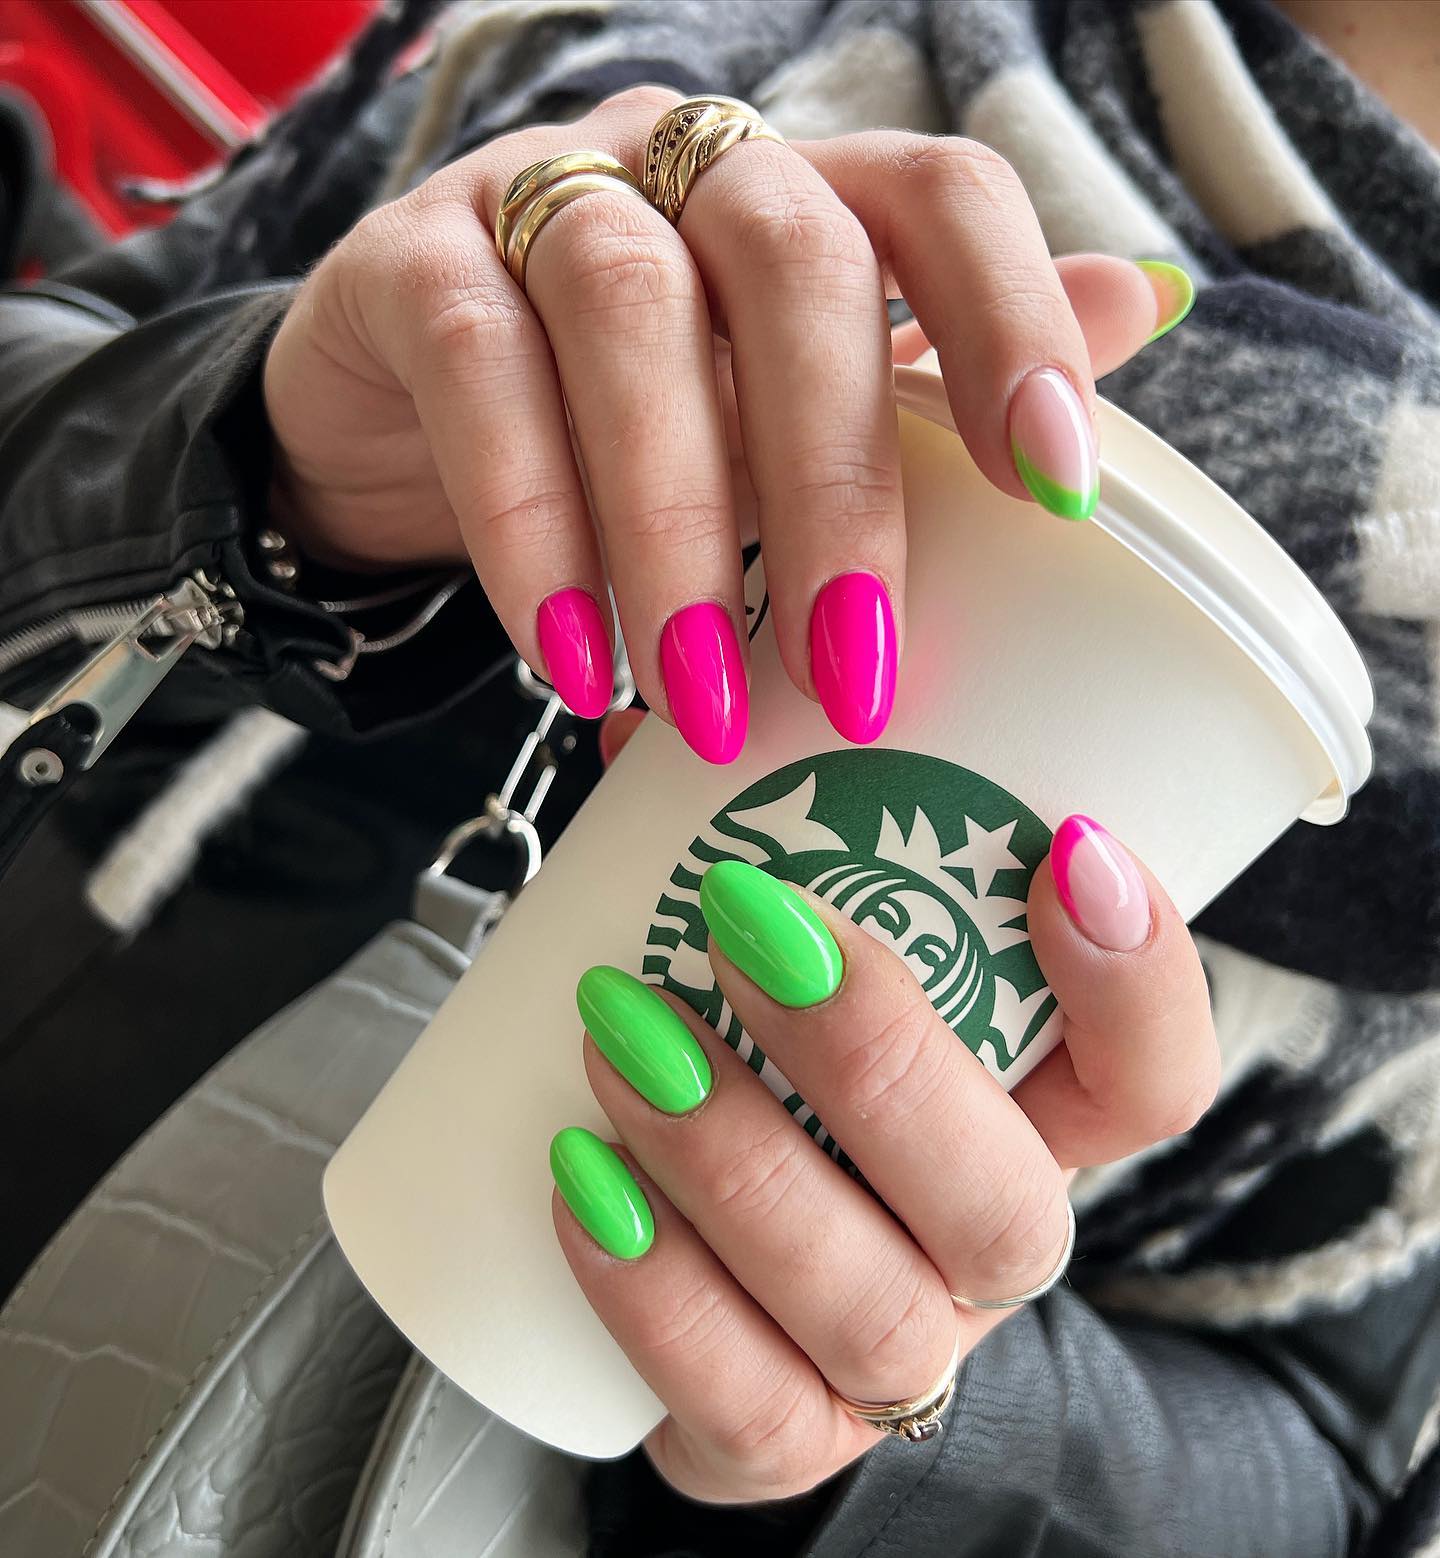 pink neon nails